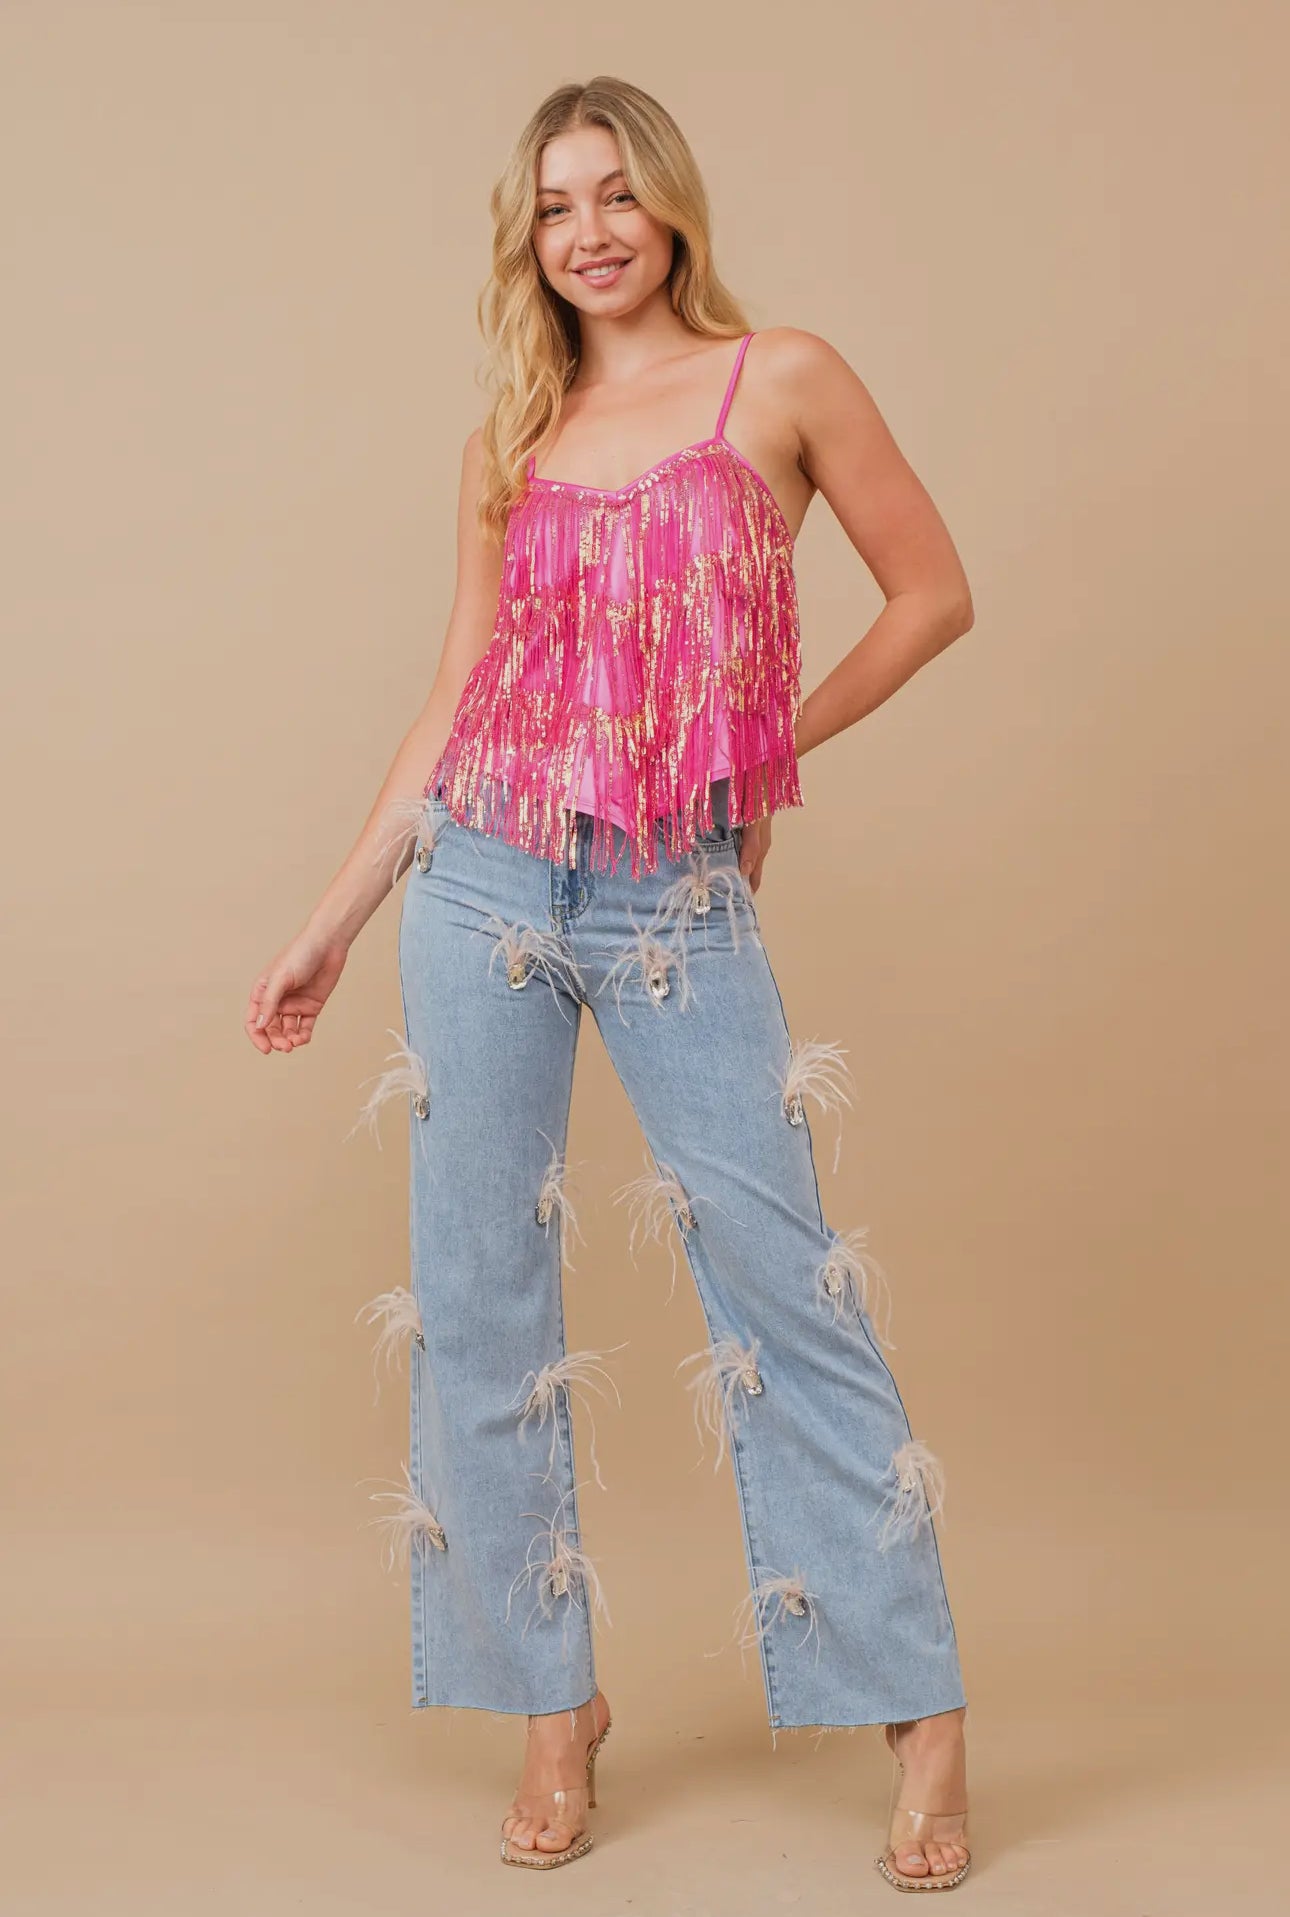 Showstopper Feather Stone Embellished Denim Jeans